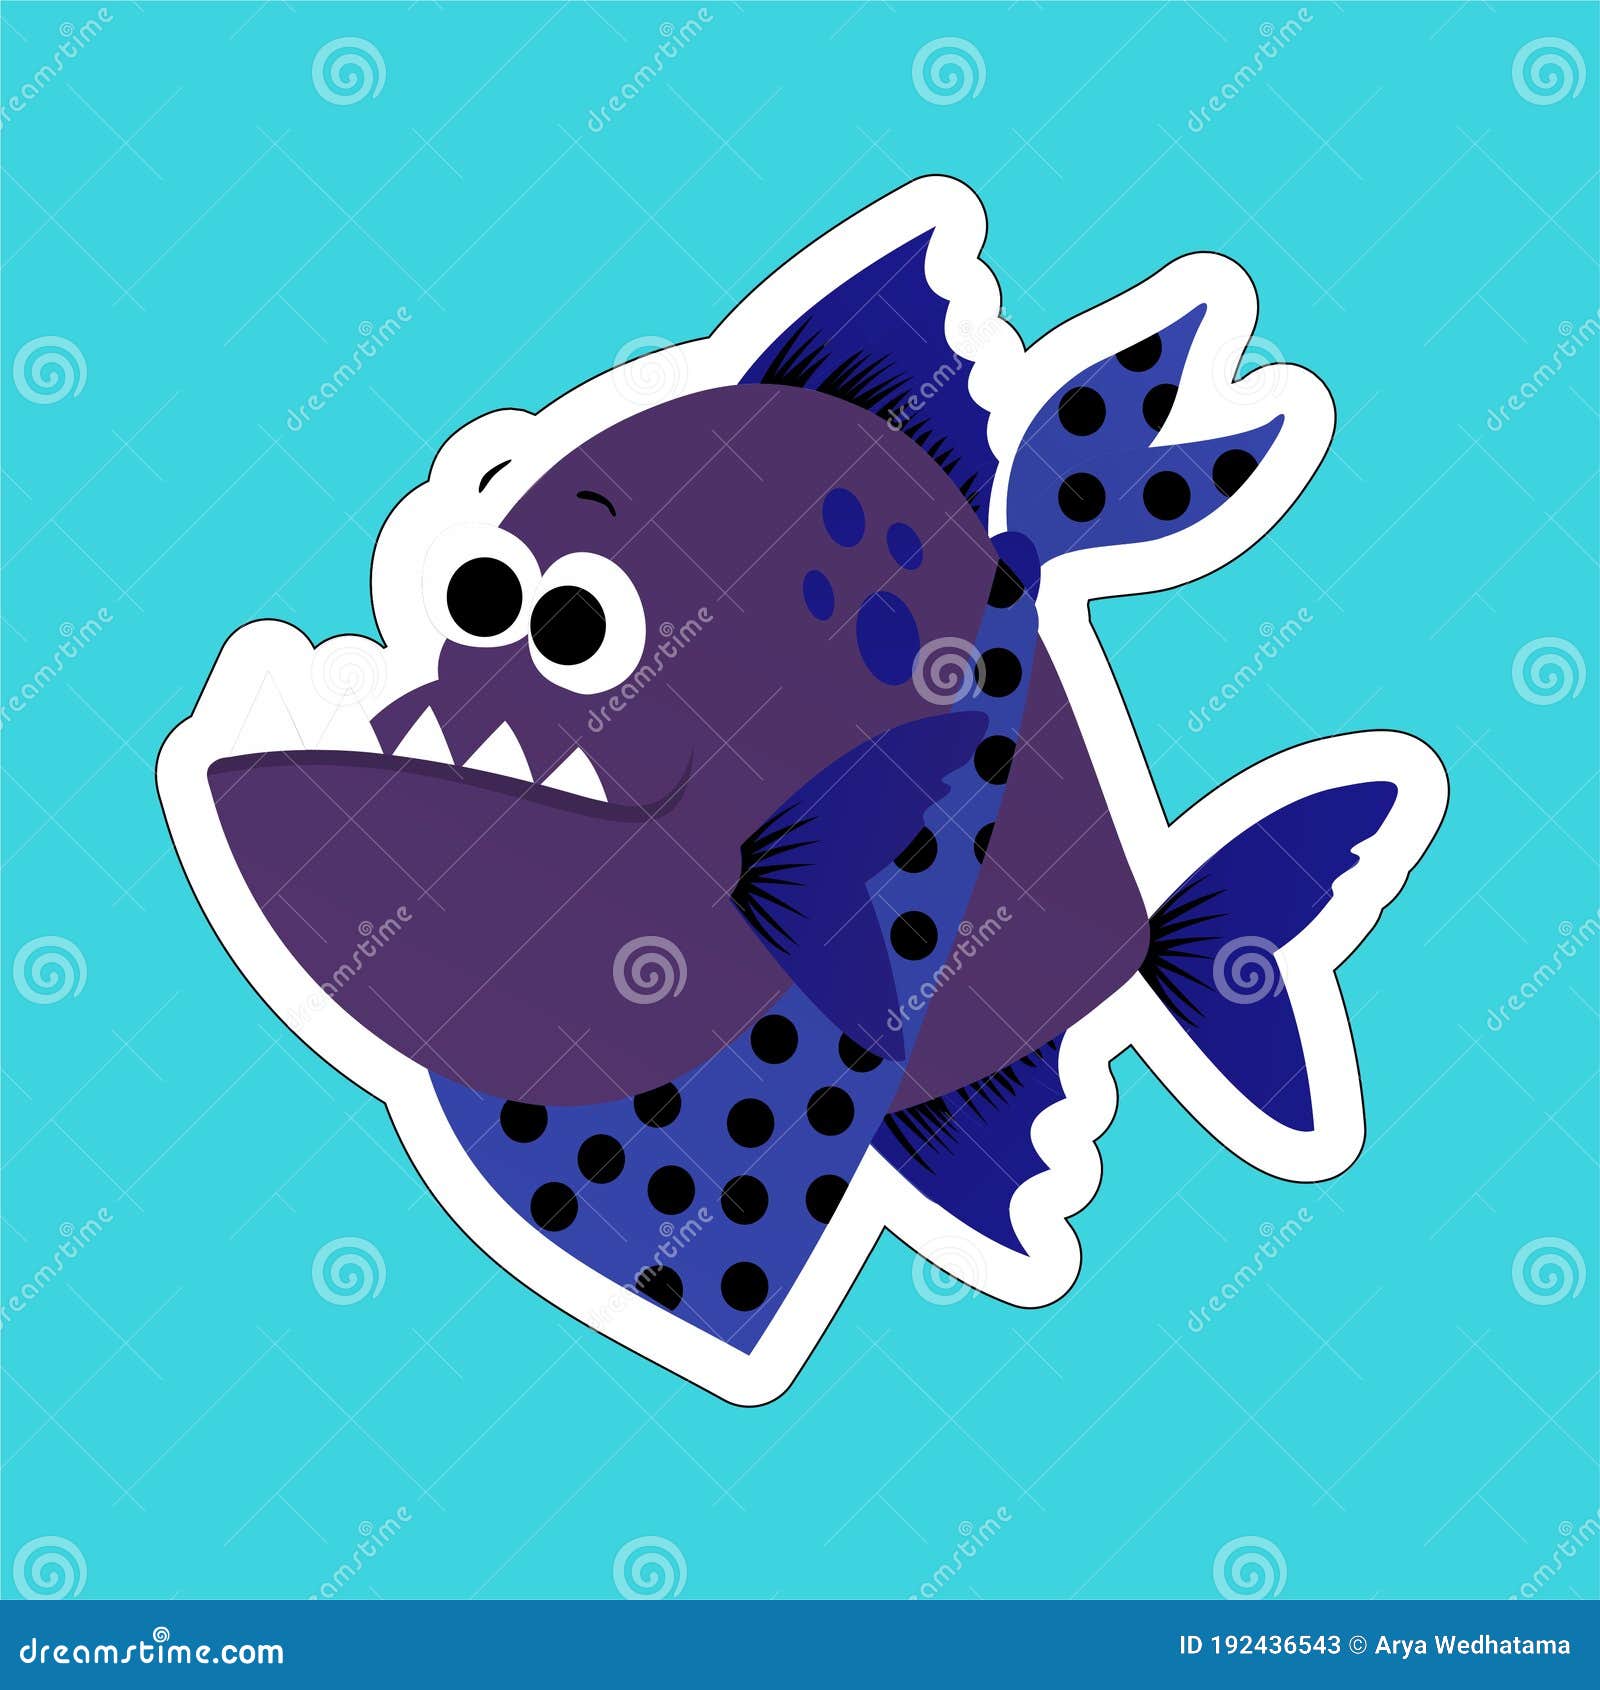 Sticker of Purple Fish with Blue Fins and Sharp Teeth Cartoon, Cute Funny  Character, Flat Design Stock Illustration - Illustration of happy, aquatic:  192436543